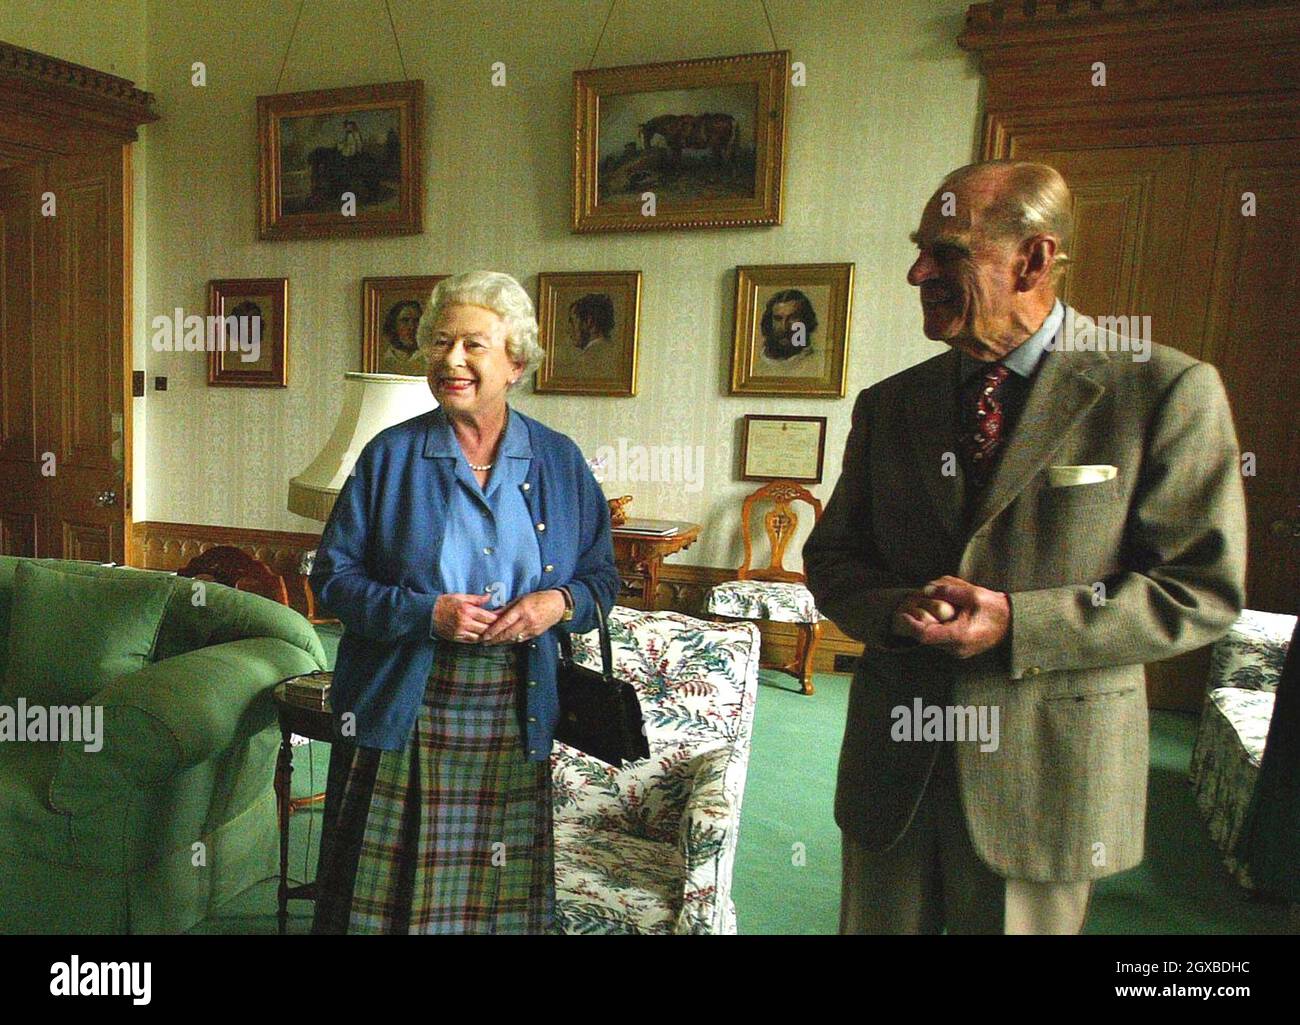 Queen Elizabeth II and Prince Philip, Duke of Edinburgh, on holiday at Balmoral Castle in Scotland on August 16, 2005.   Anwar Hussein/allctiondigital.com  Stock Photo